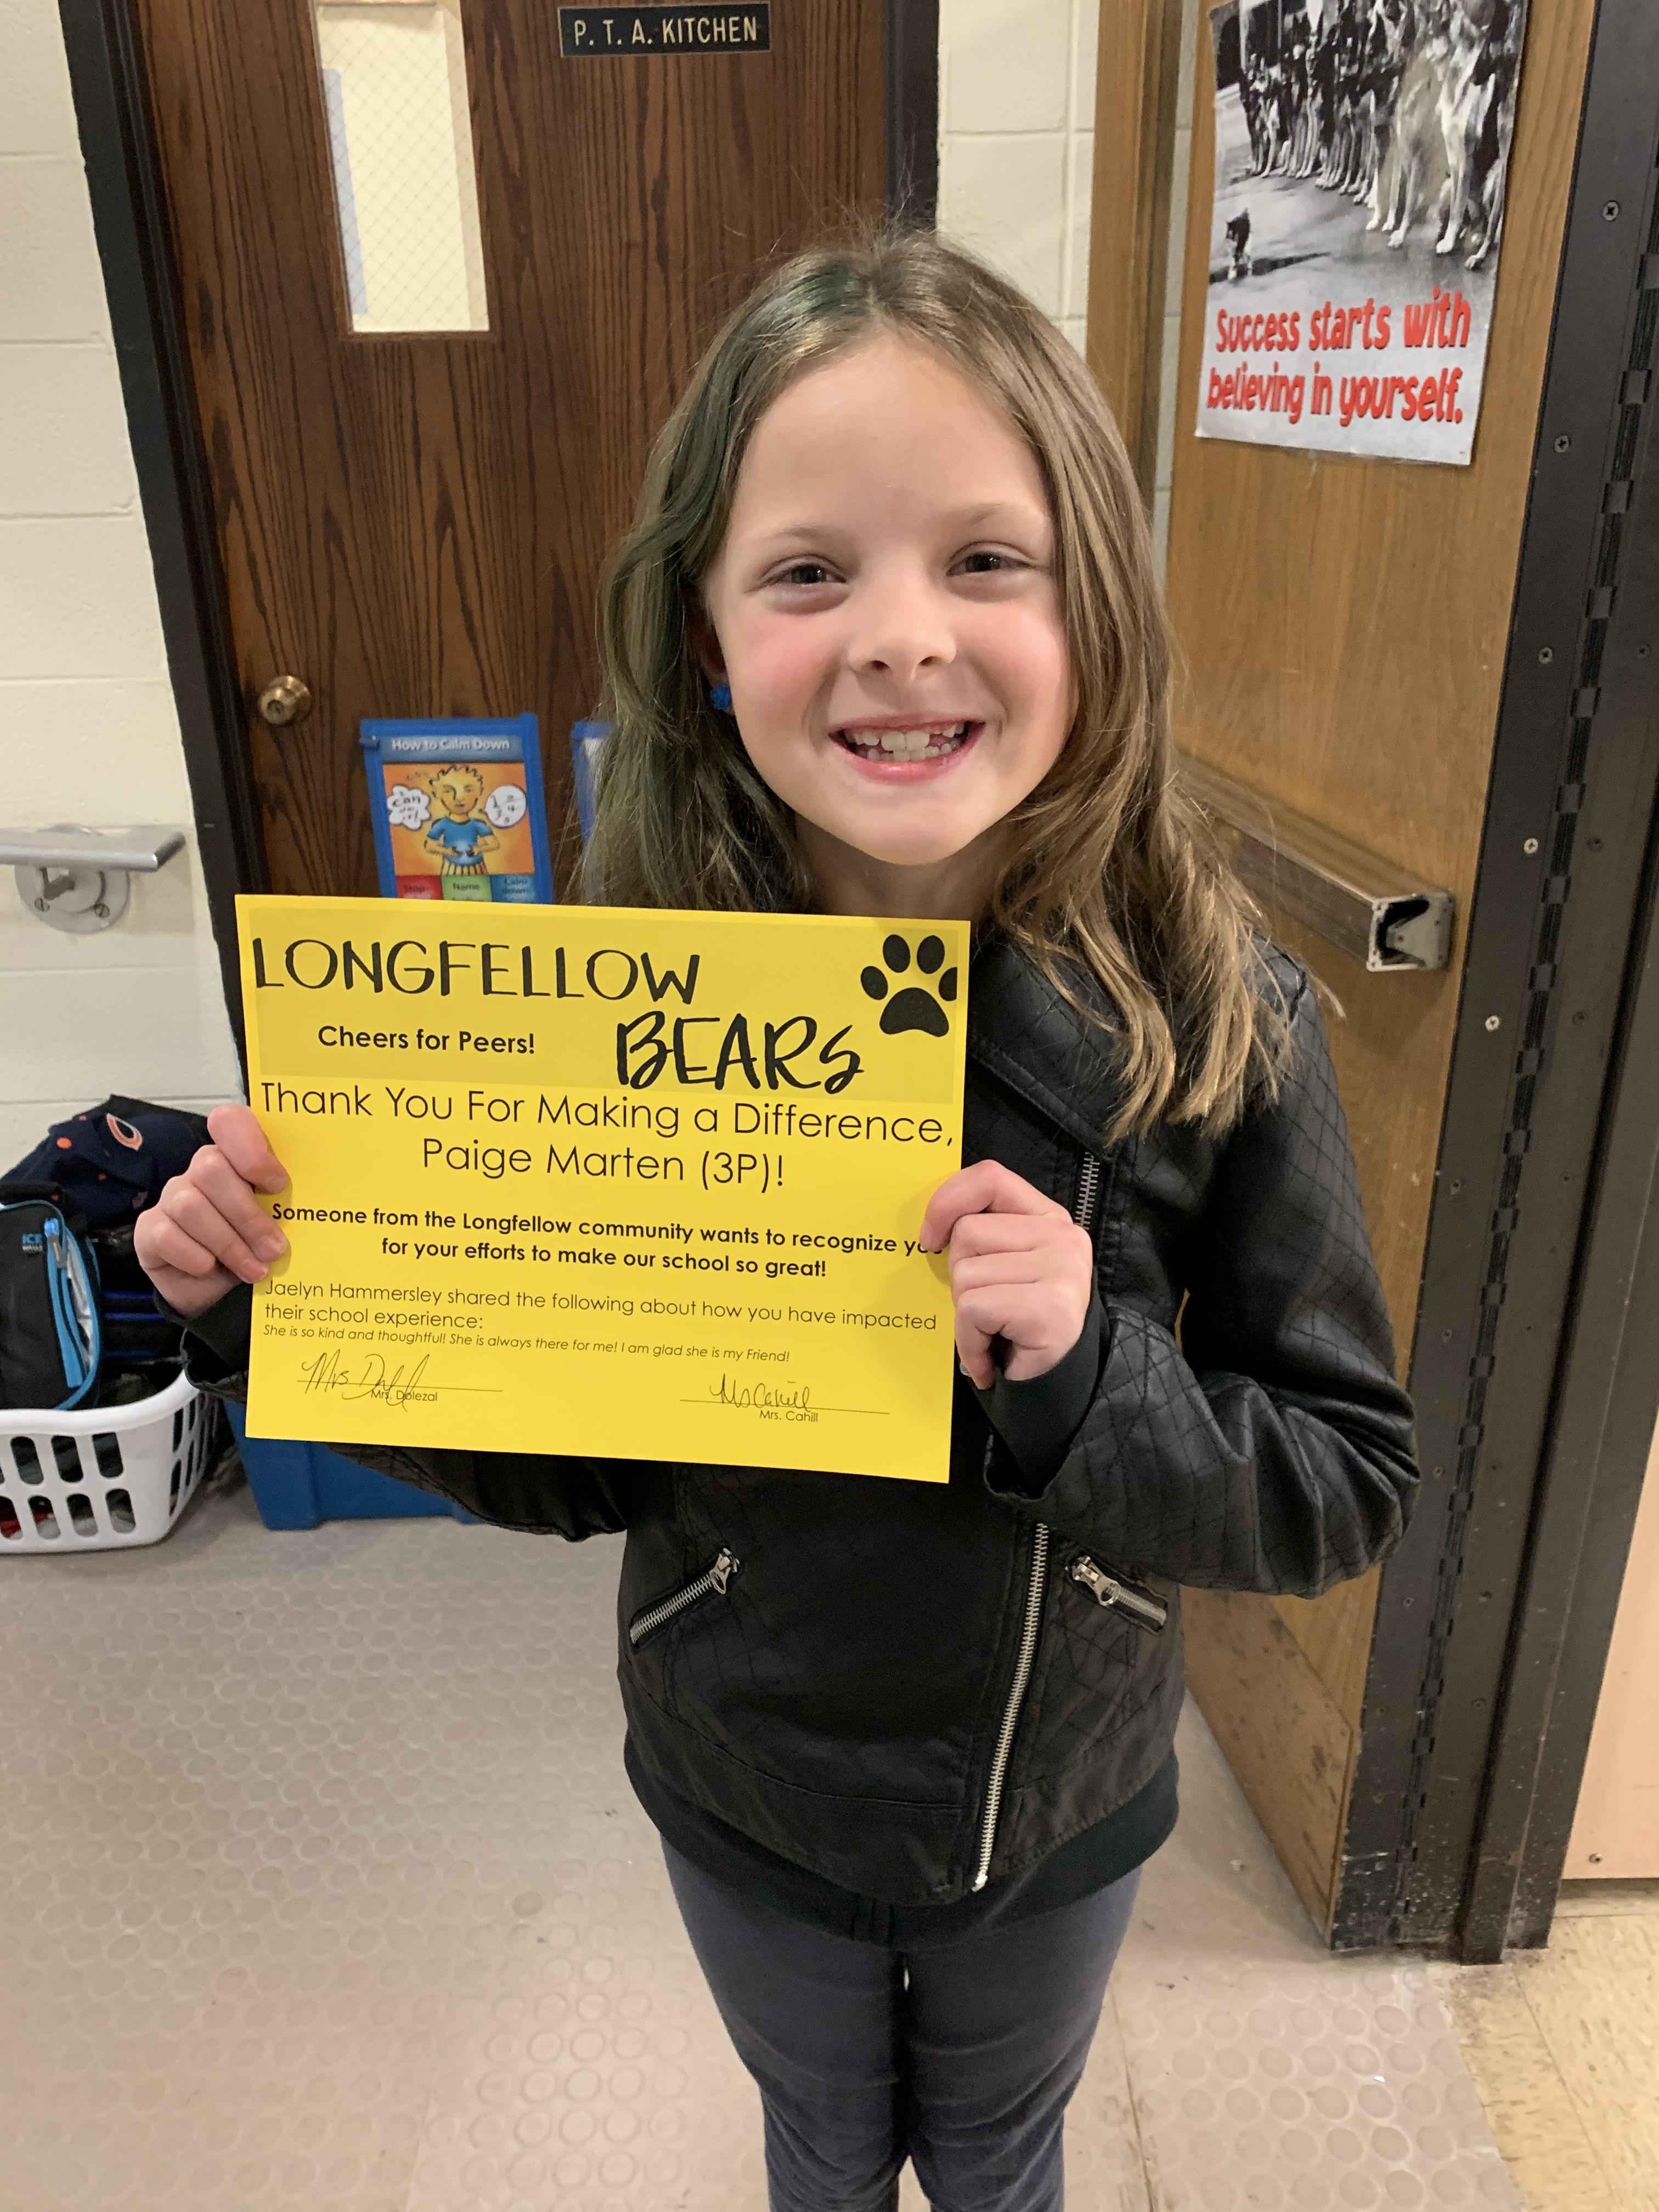 Student with "Cheers for Peers" certificate